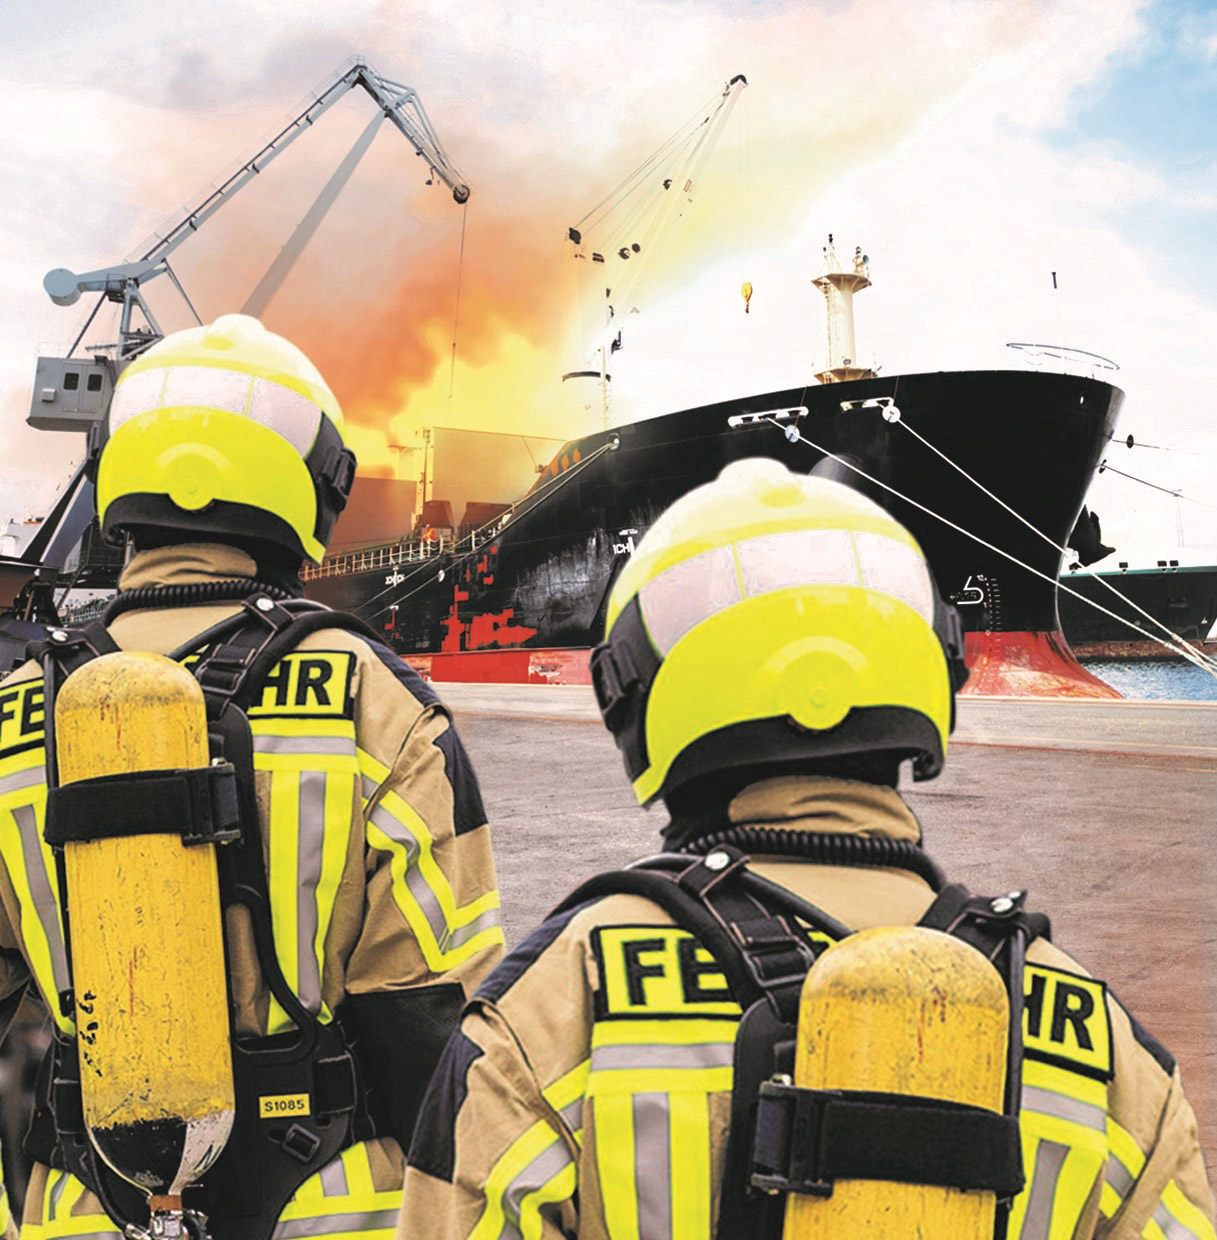 Shipboard fires pose a particular challenge for firefighters